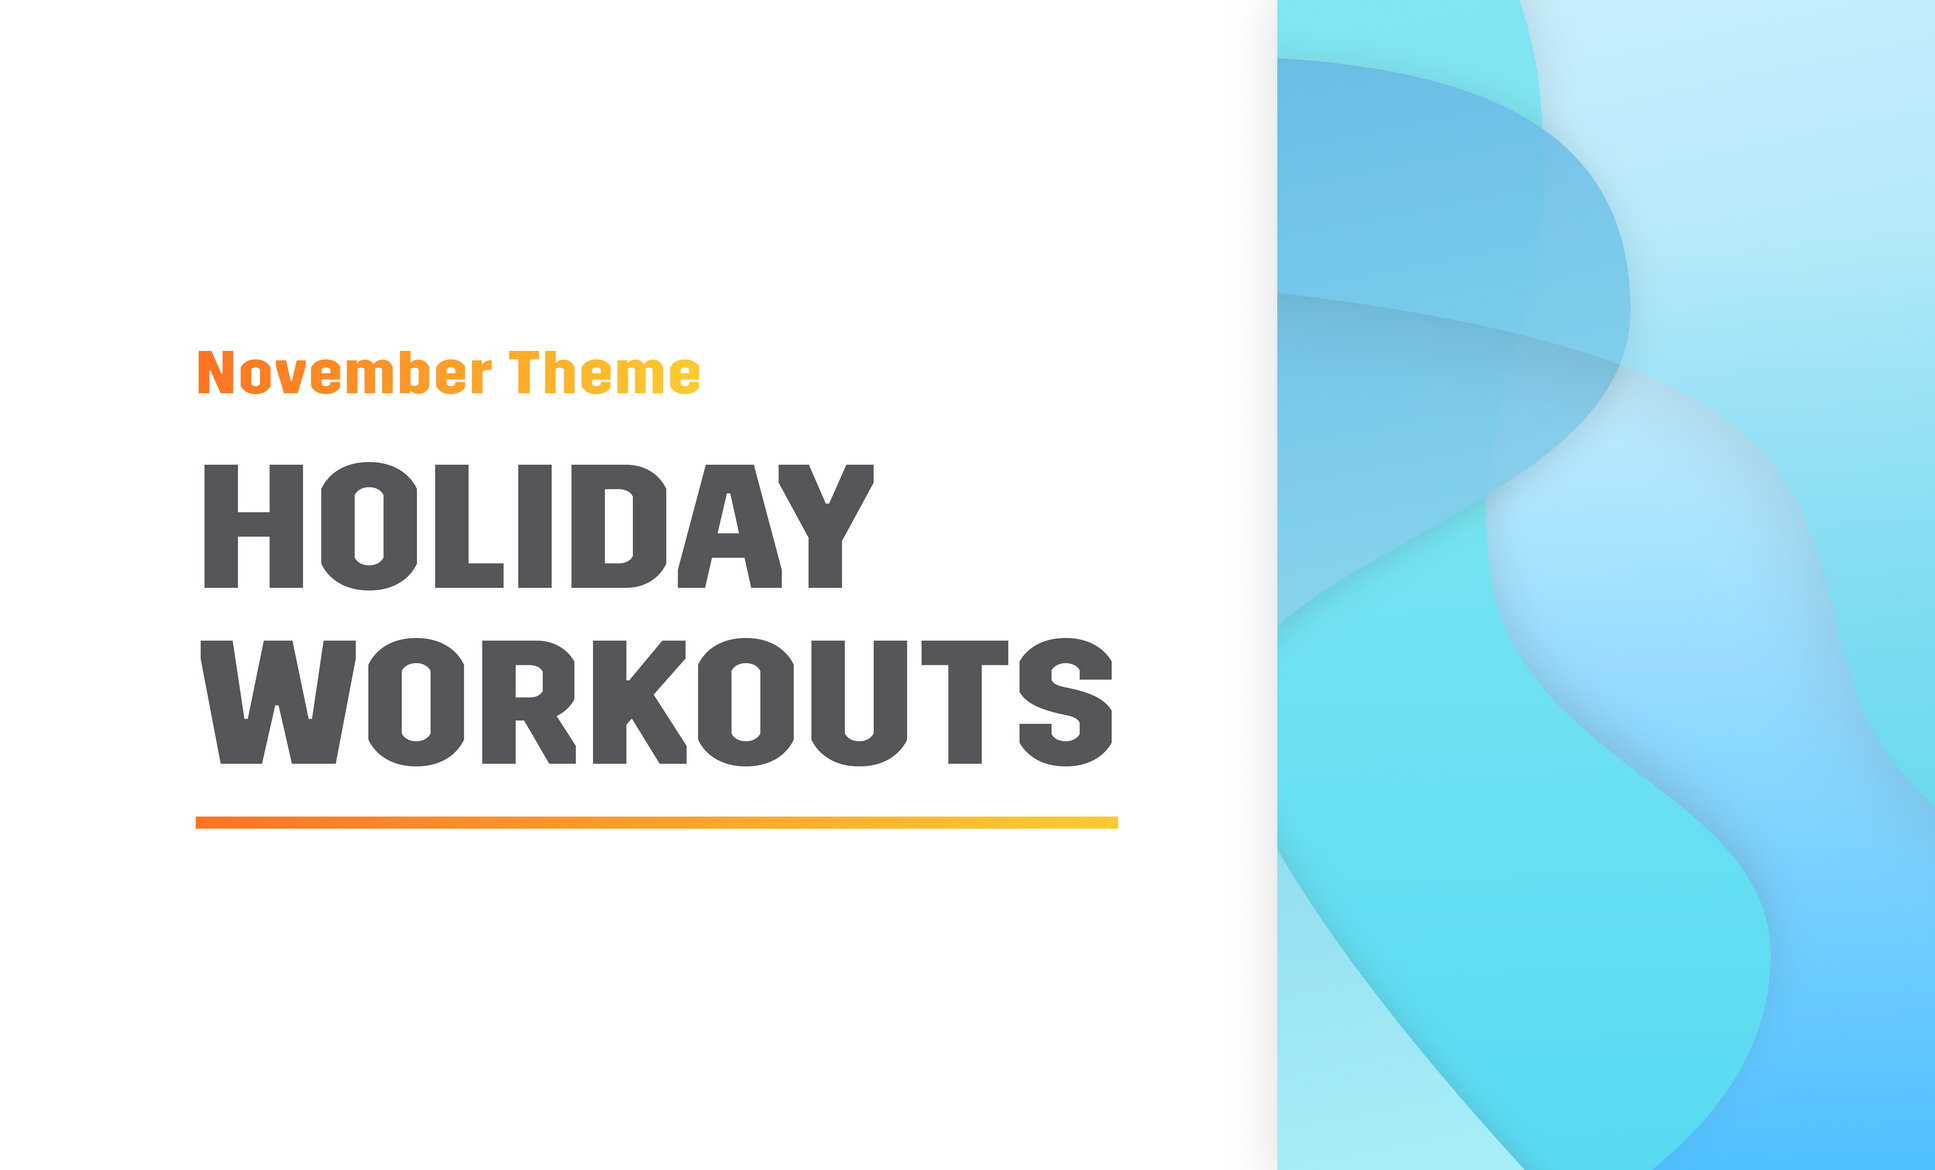 Get ready for the holiday fun run season with these new workouts!